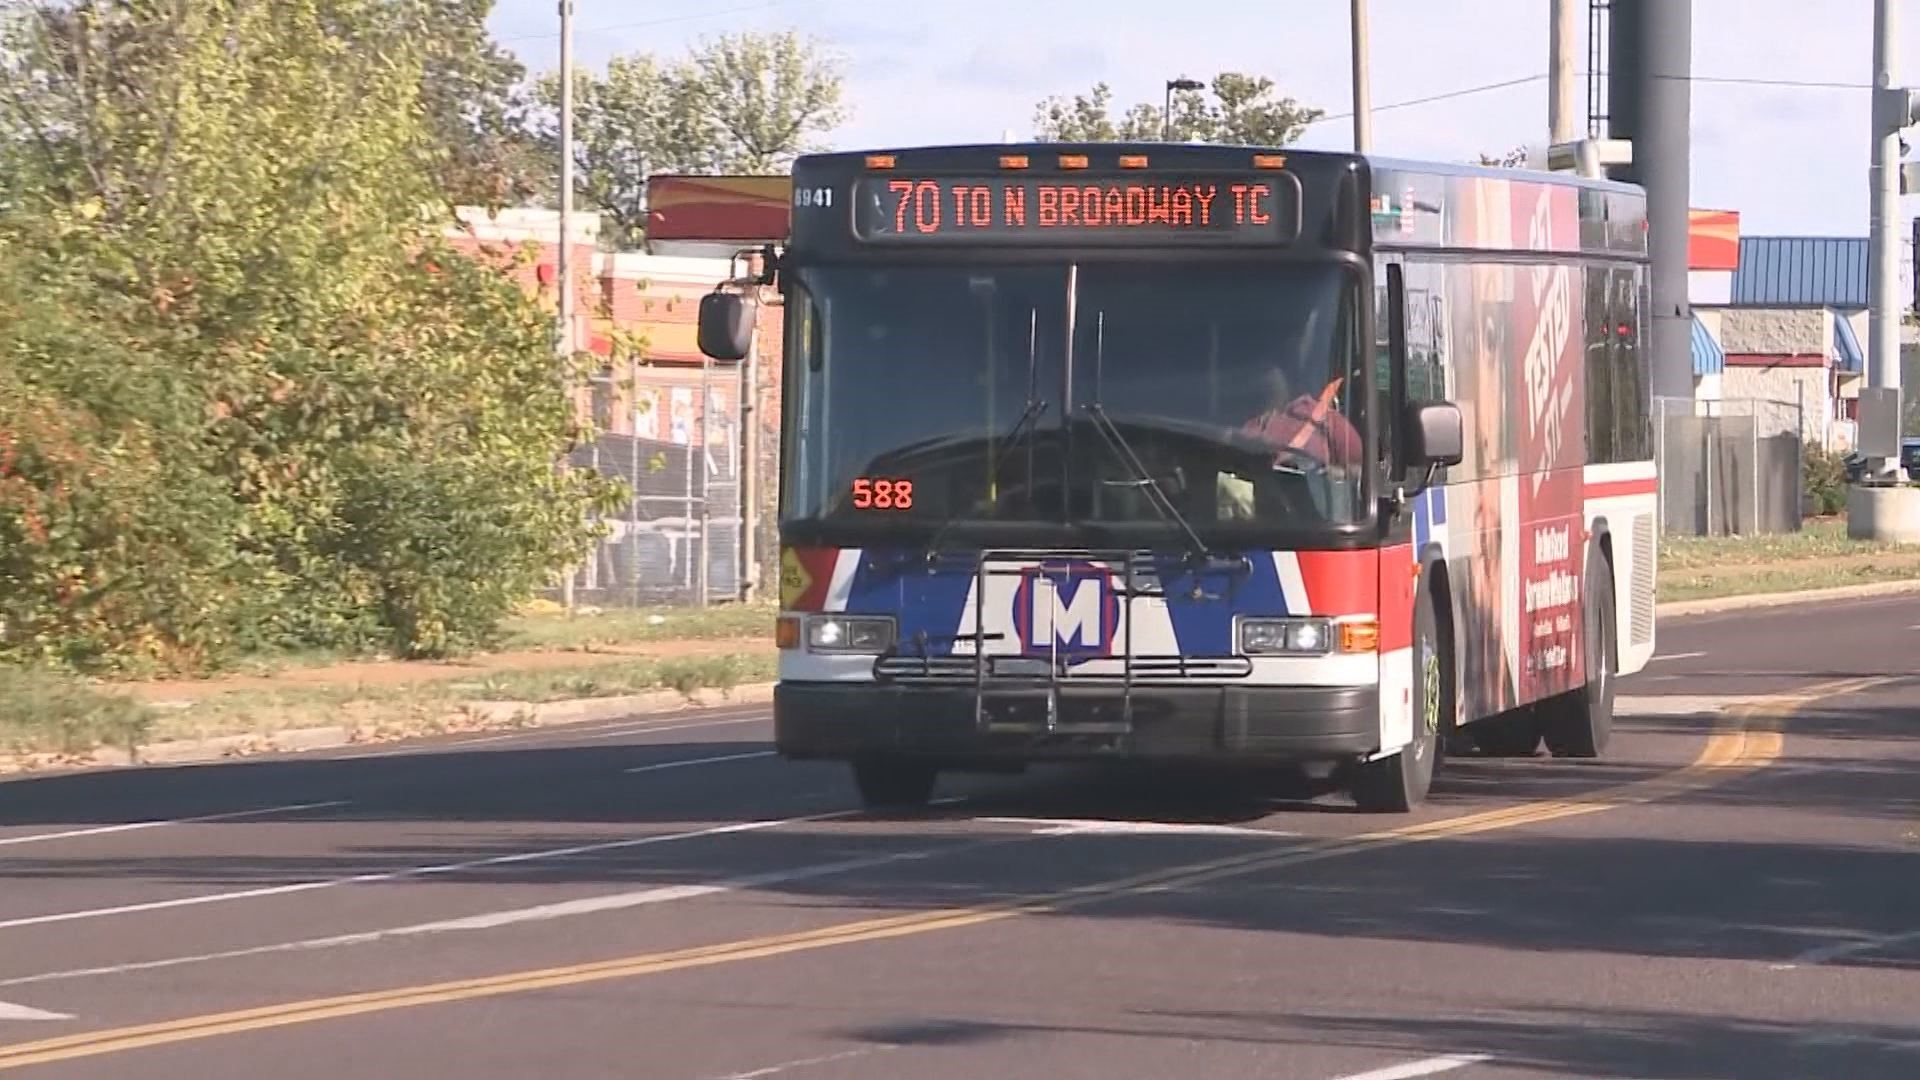 The adjustments will start on Nov. 29. This does not affect MetroLink or MetroBus in Illinois.